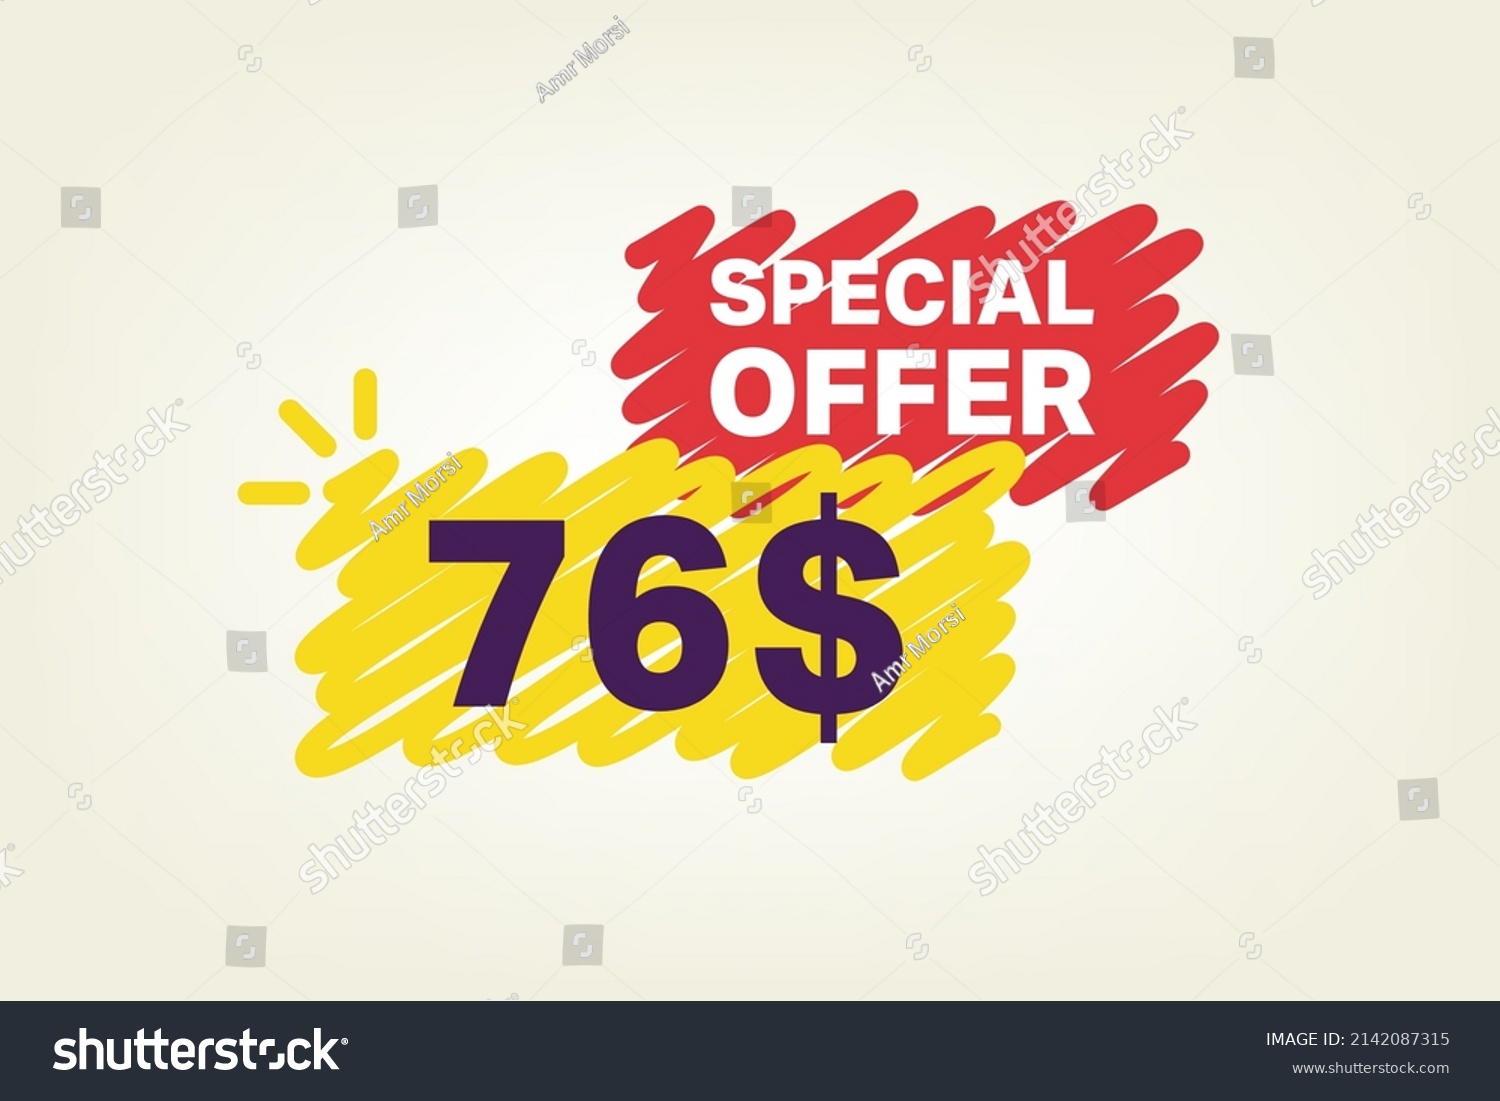 SVG of 76$ OFF Sale Discount banner shape template. Super Sale 76 Dollar Special offer badge end of the season sale coupon bubble icon. Modern concept design. Discount offer price tag vector illustration. svg